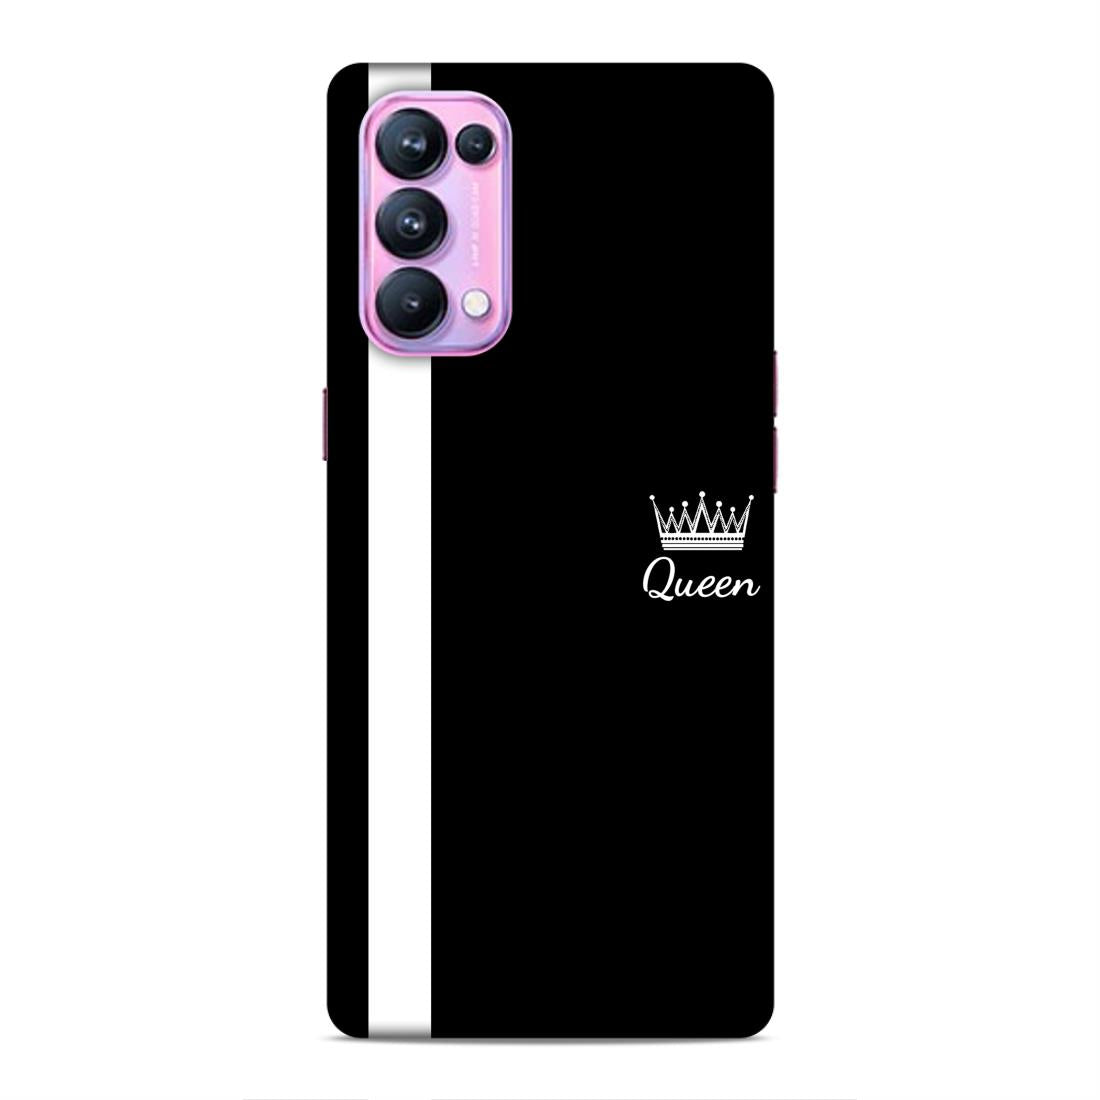 Queen Hard Back Case For Oppo Reno 5 Pro